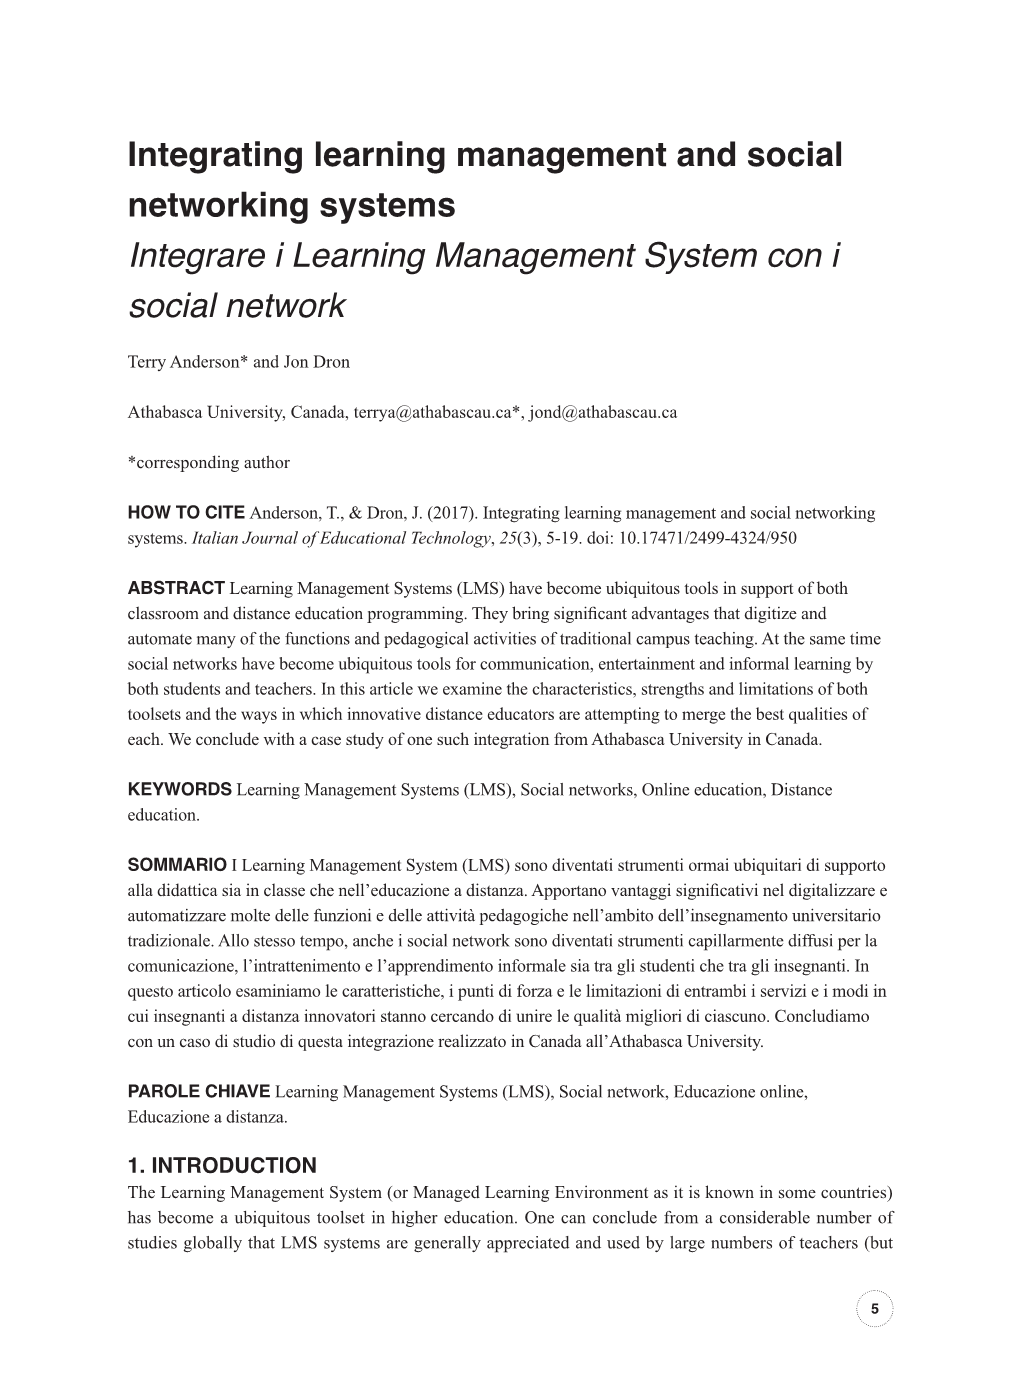 Integrating Learning Management and Social Networking Systems Integrare I Learning Management System Con I Social Network